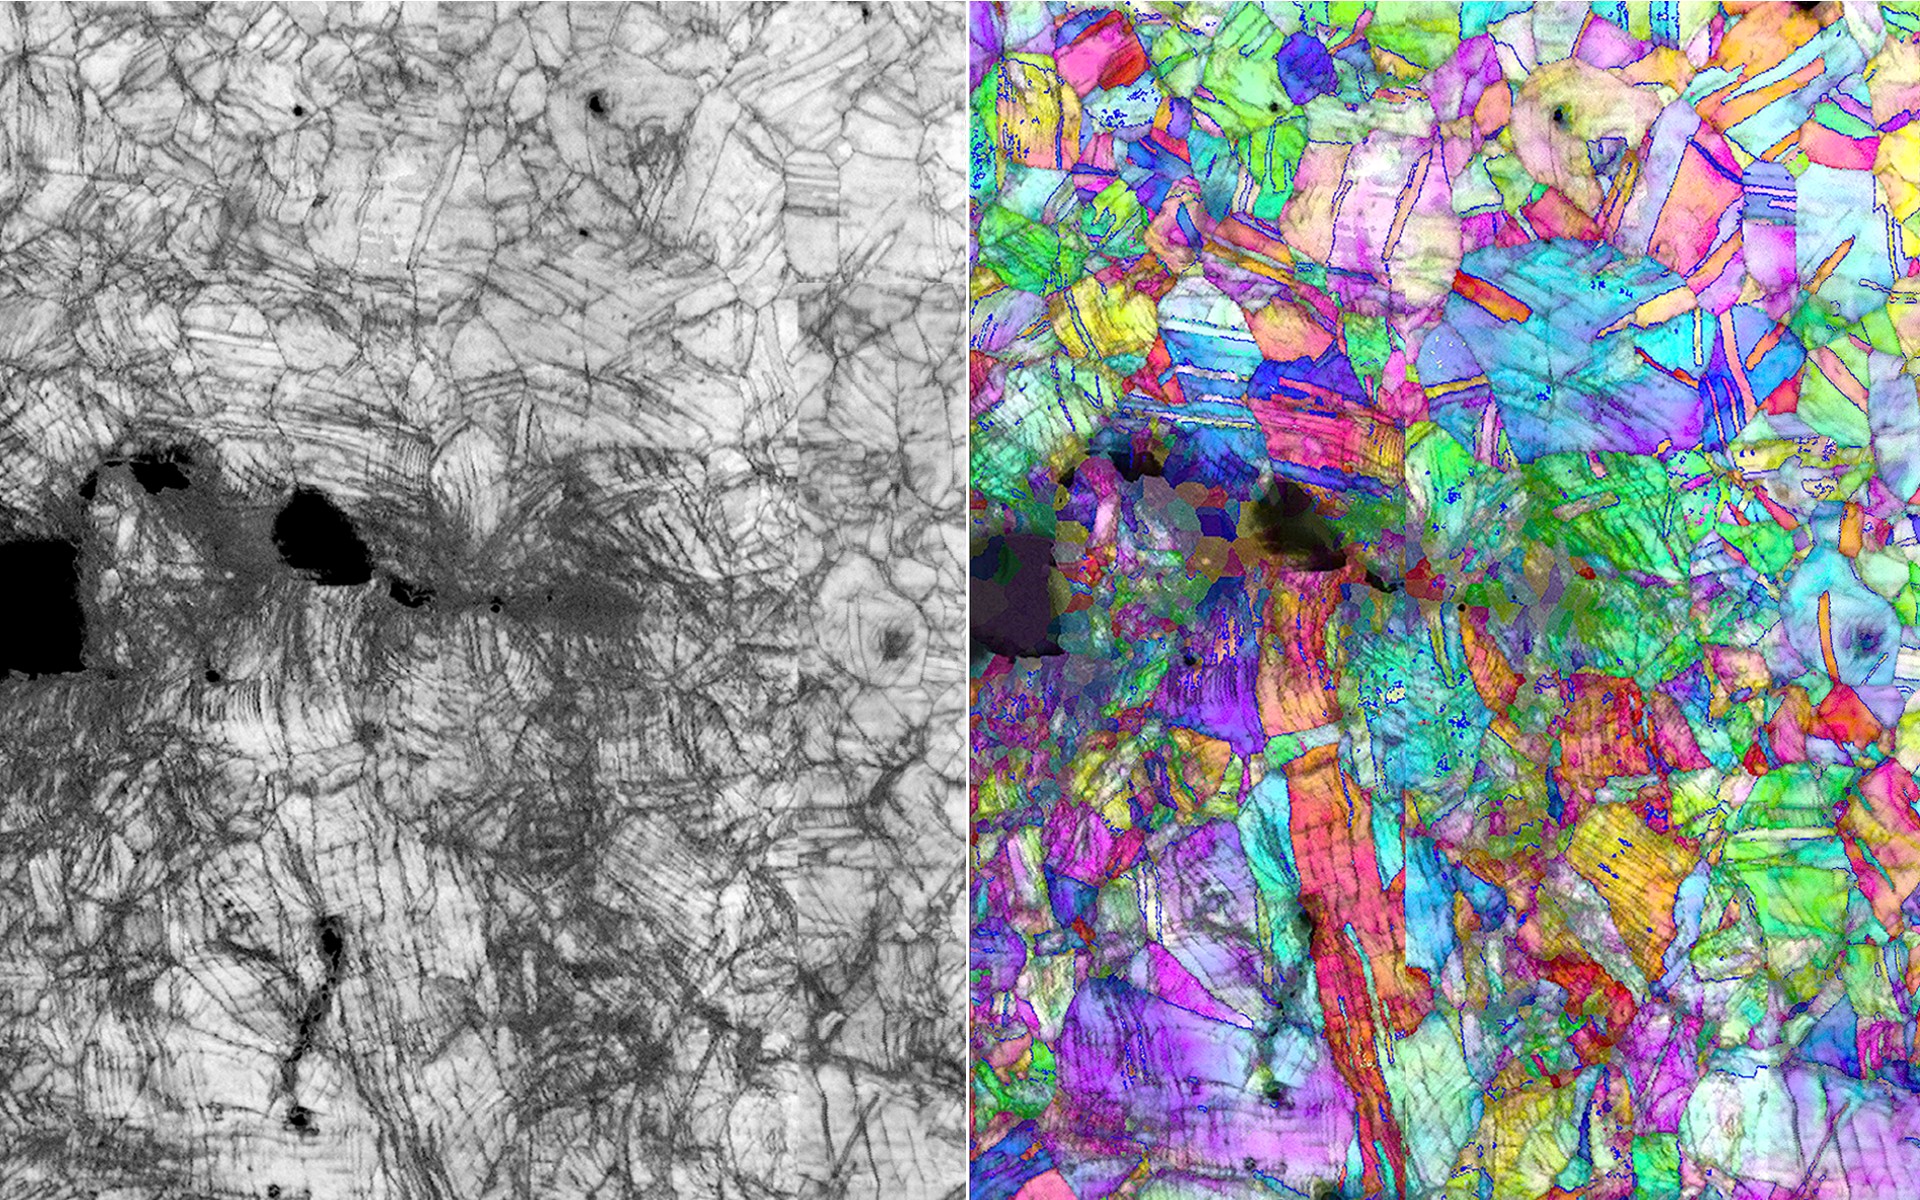 Microscopy-generated images showing the path of a fracture and accompanying crystal structure deformation